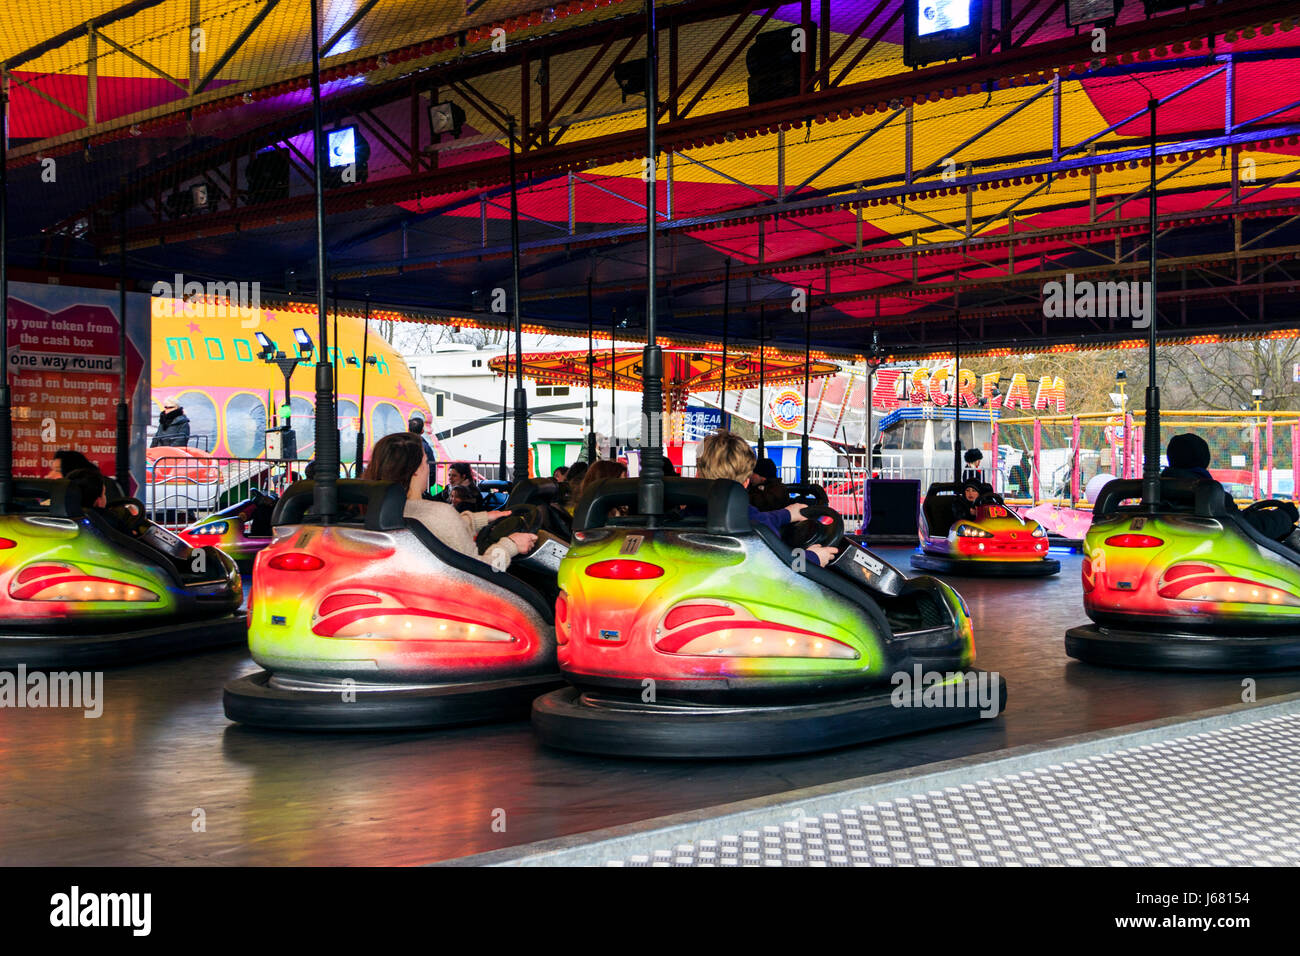 Multicoloured dodgems or bumper cars at a bank holiday funfair, London, UK Stock Photo